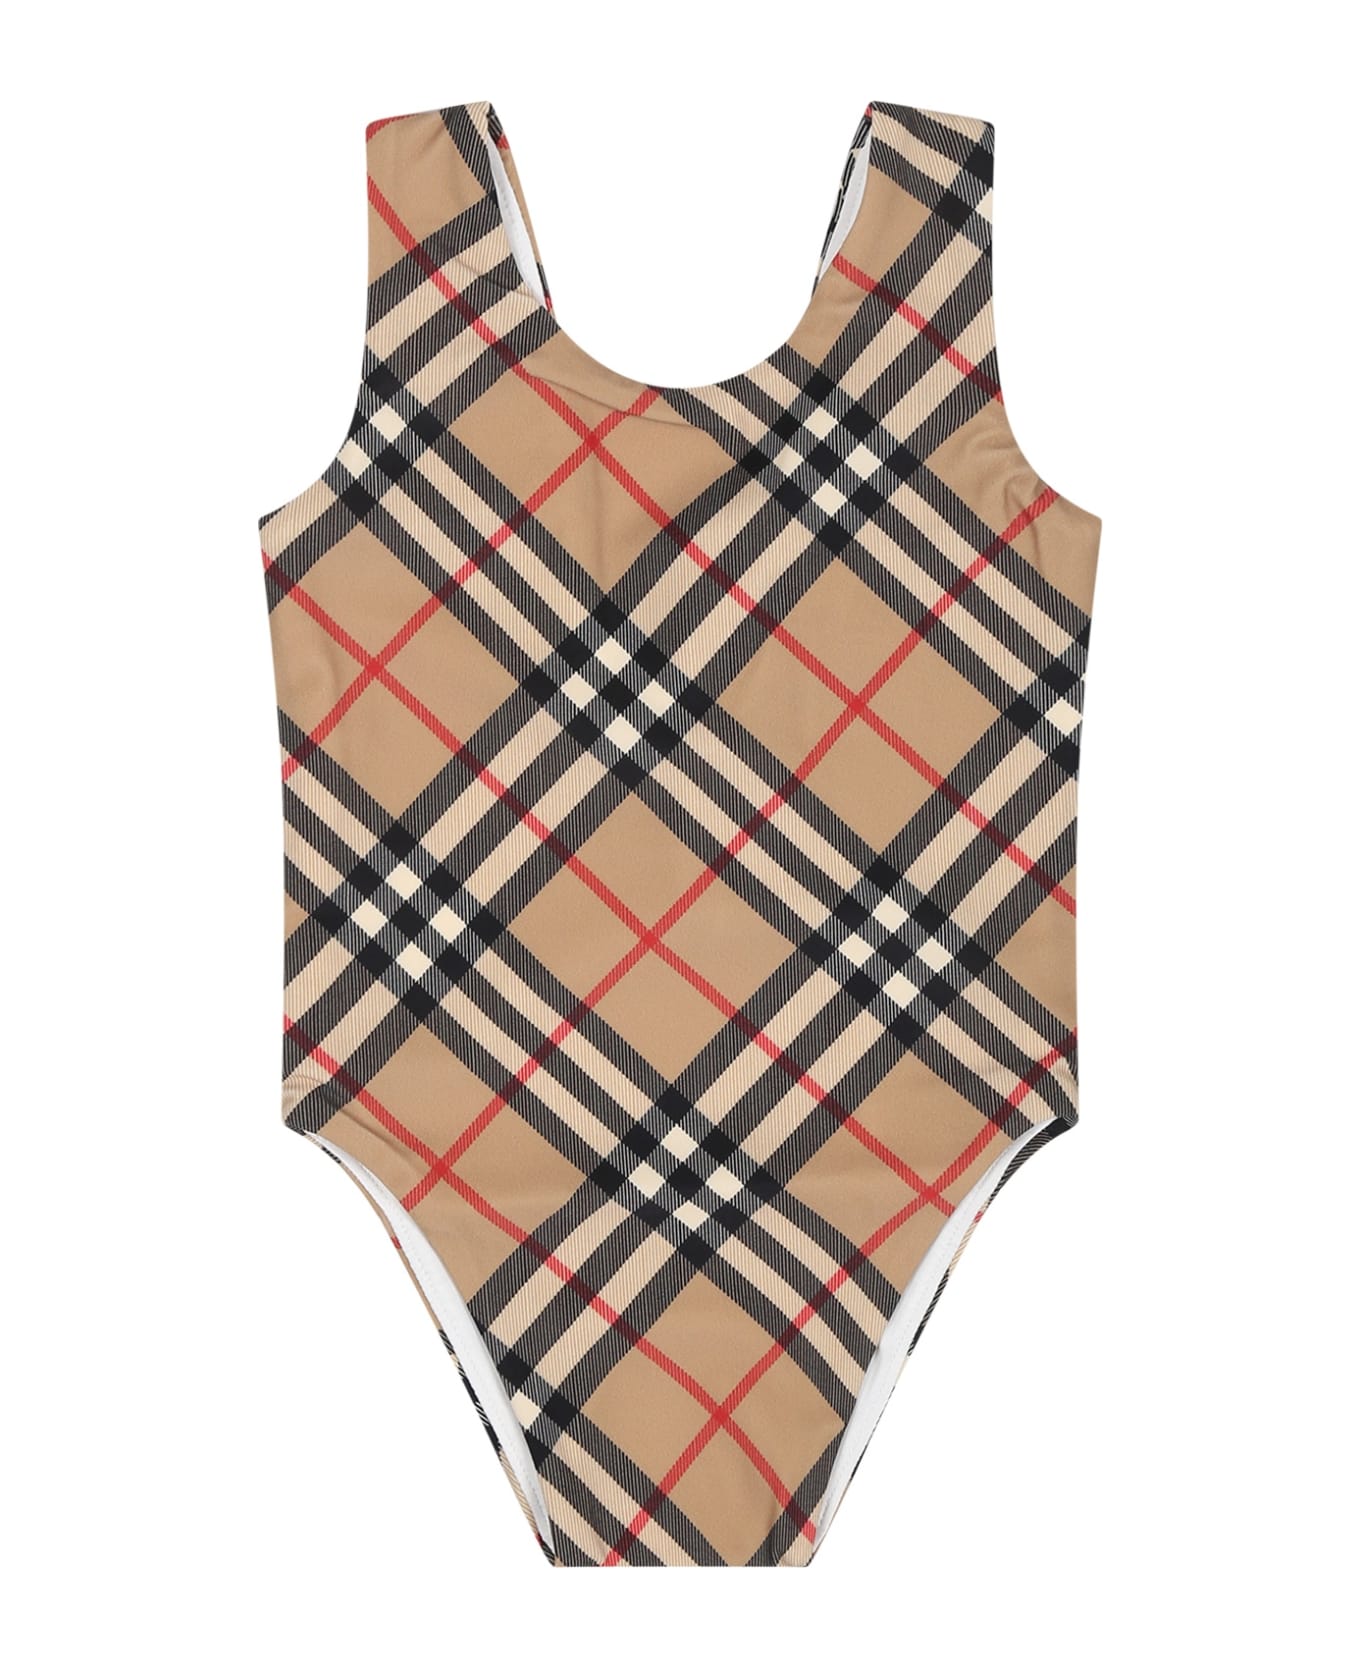 Burberry Beige Swimsuit For Baby Girl With Iconic Check - Archive beige